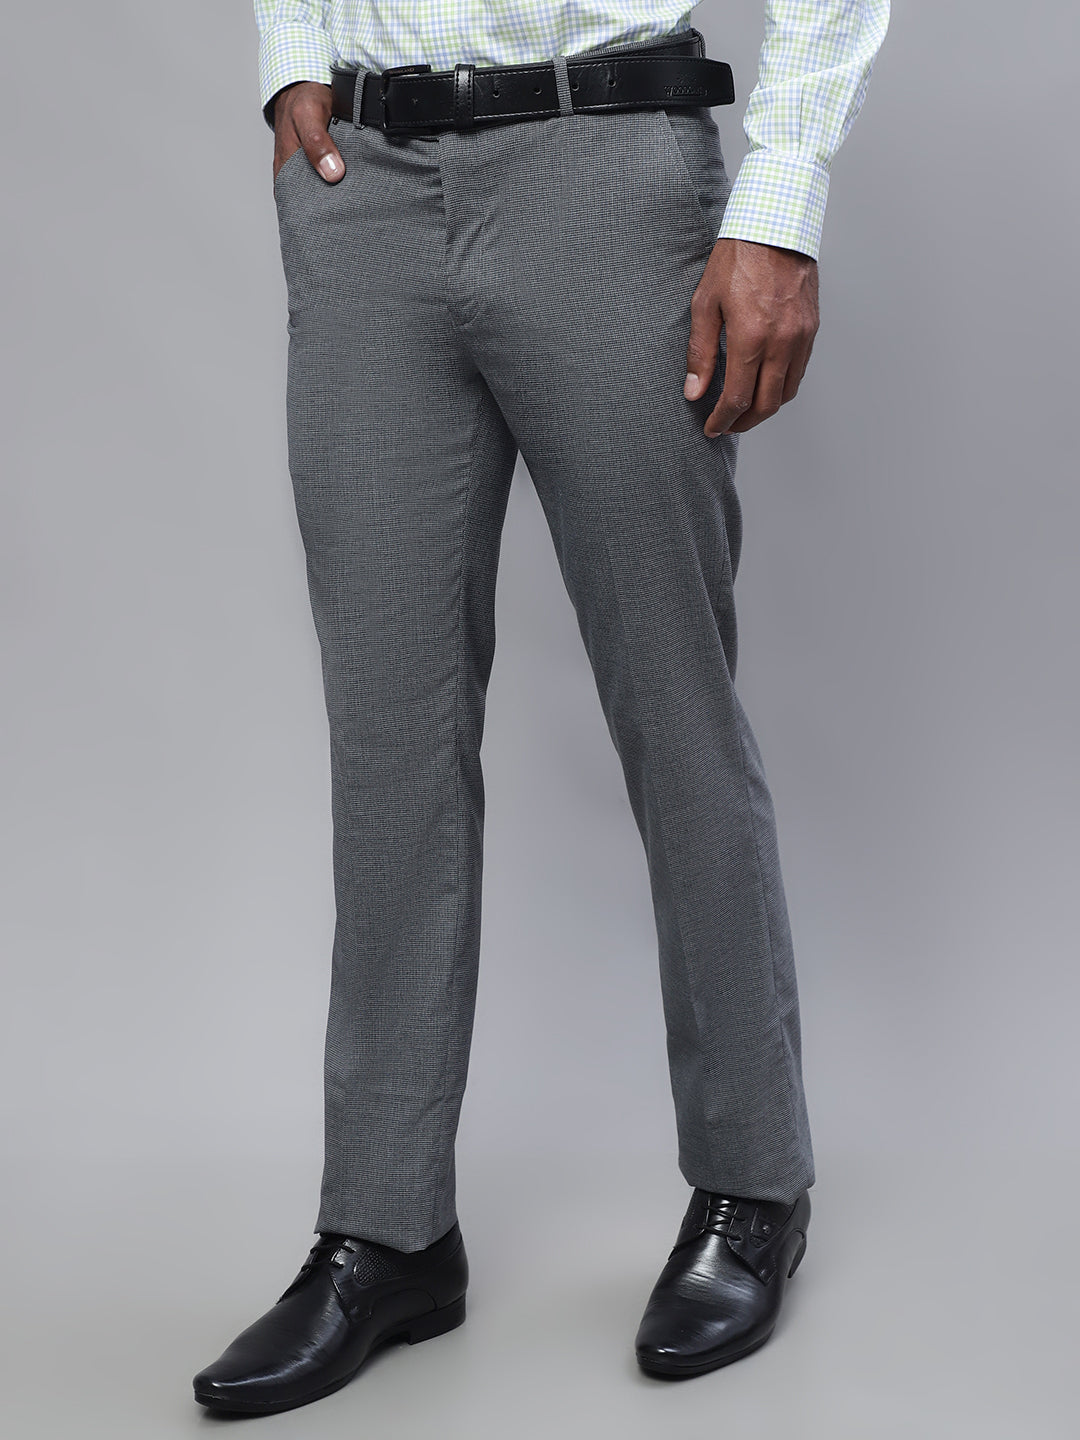 Buy Mast & Harbour Men Grey & Maroon Checked Regular Fit Trousers - Trousers  for Men 17579406 | Myntra